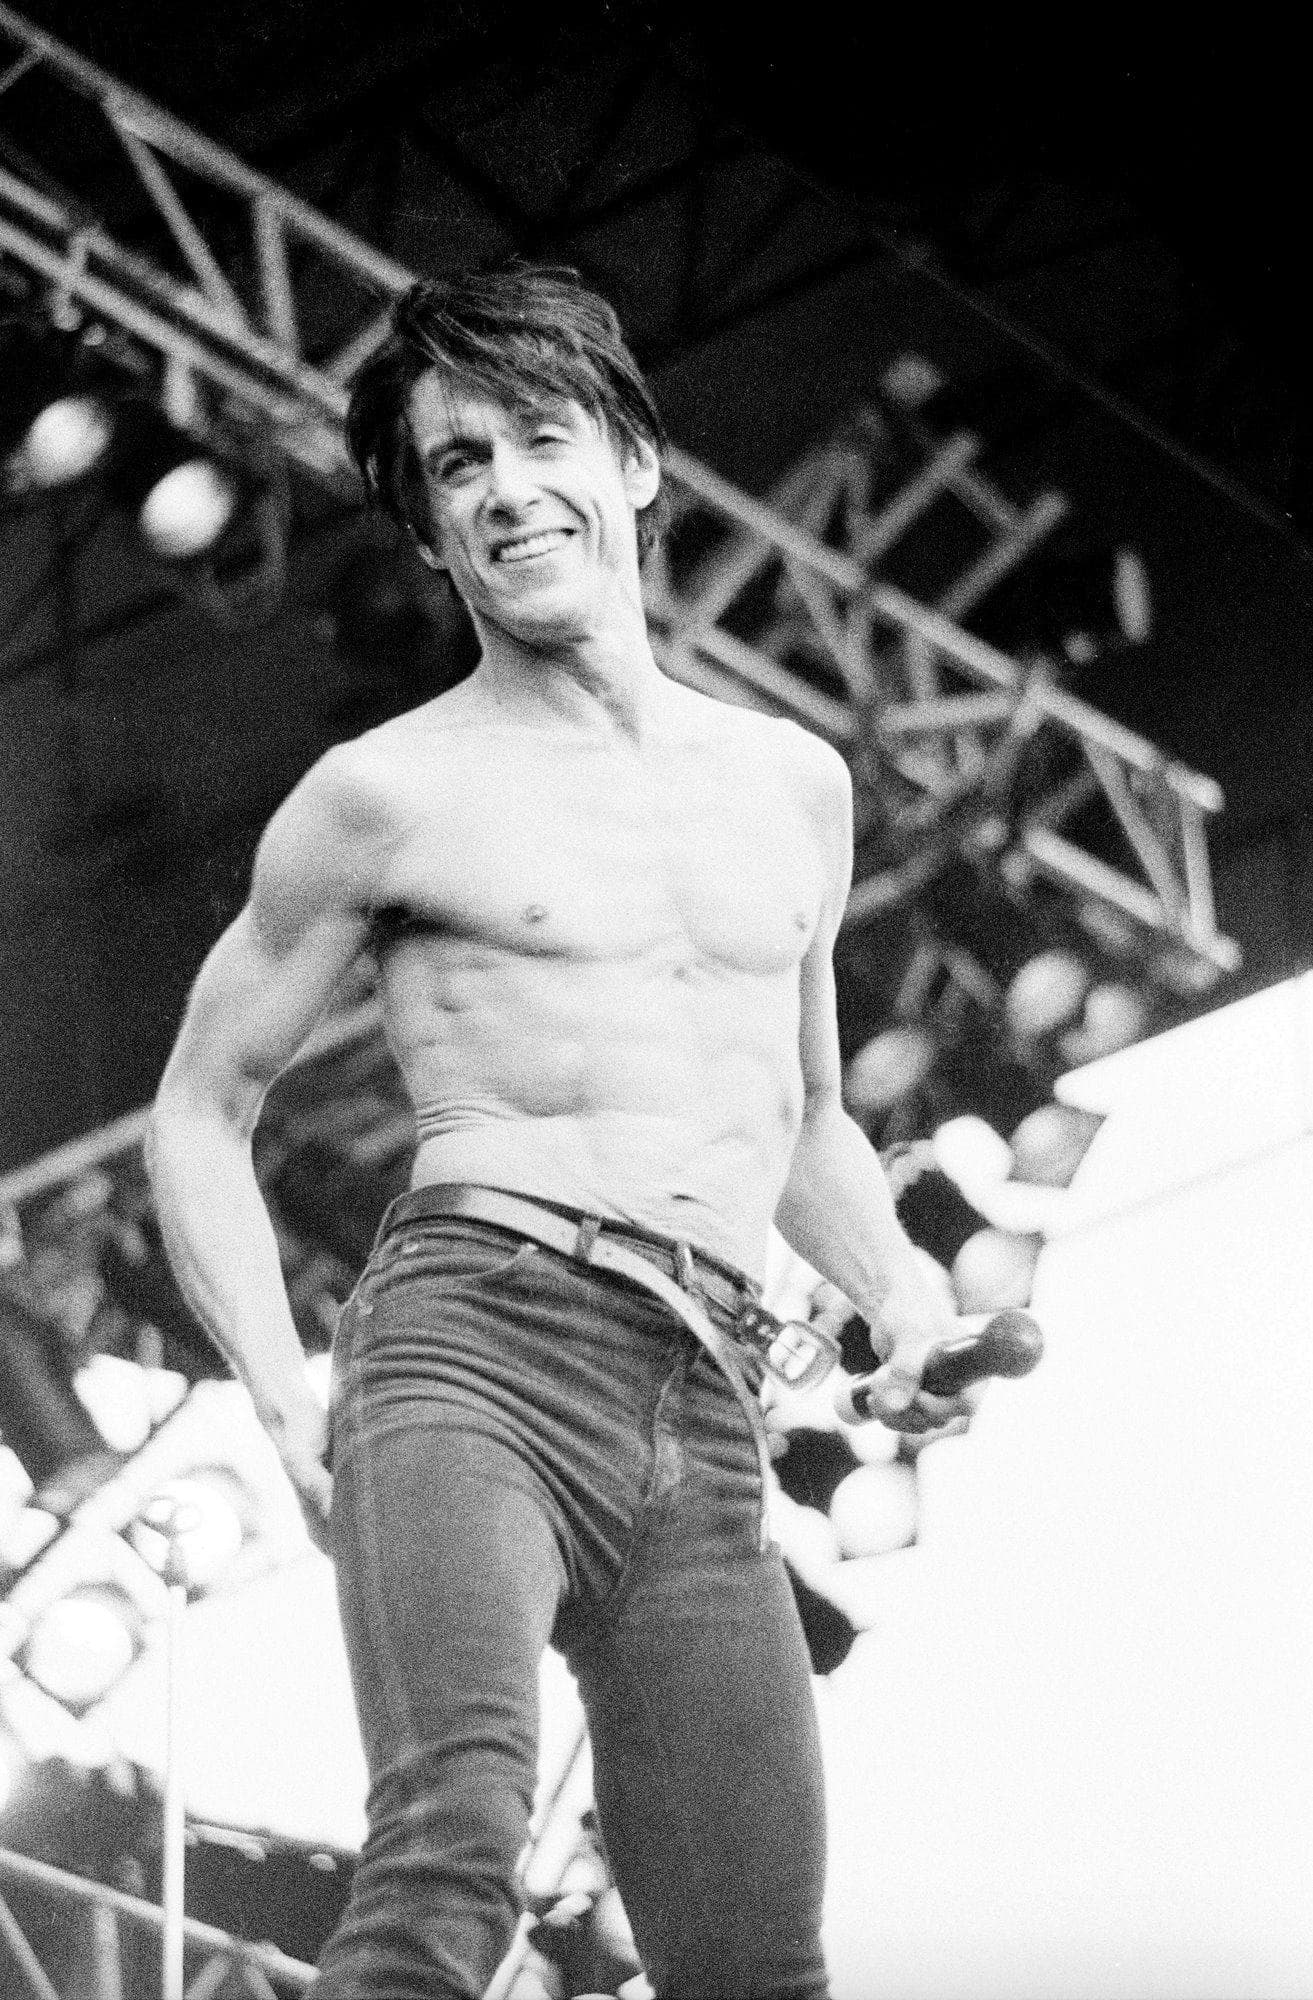 Random Bloody and Vomit-Filled Behind-The-Scenes Stories Of Iggy Pop, The Godfather Of Punk